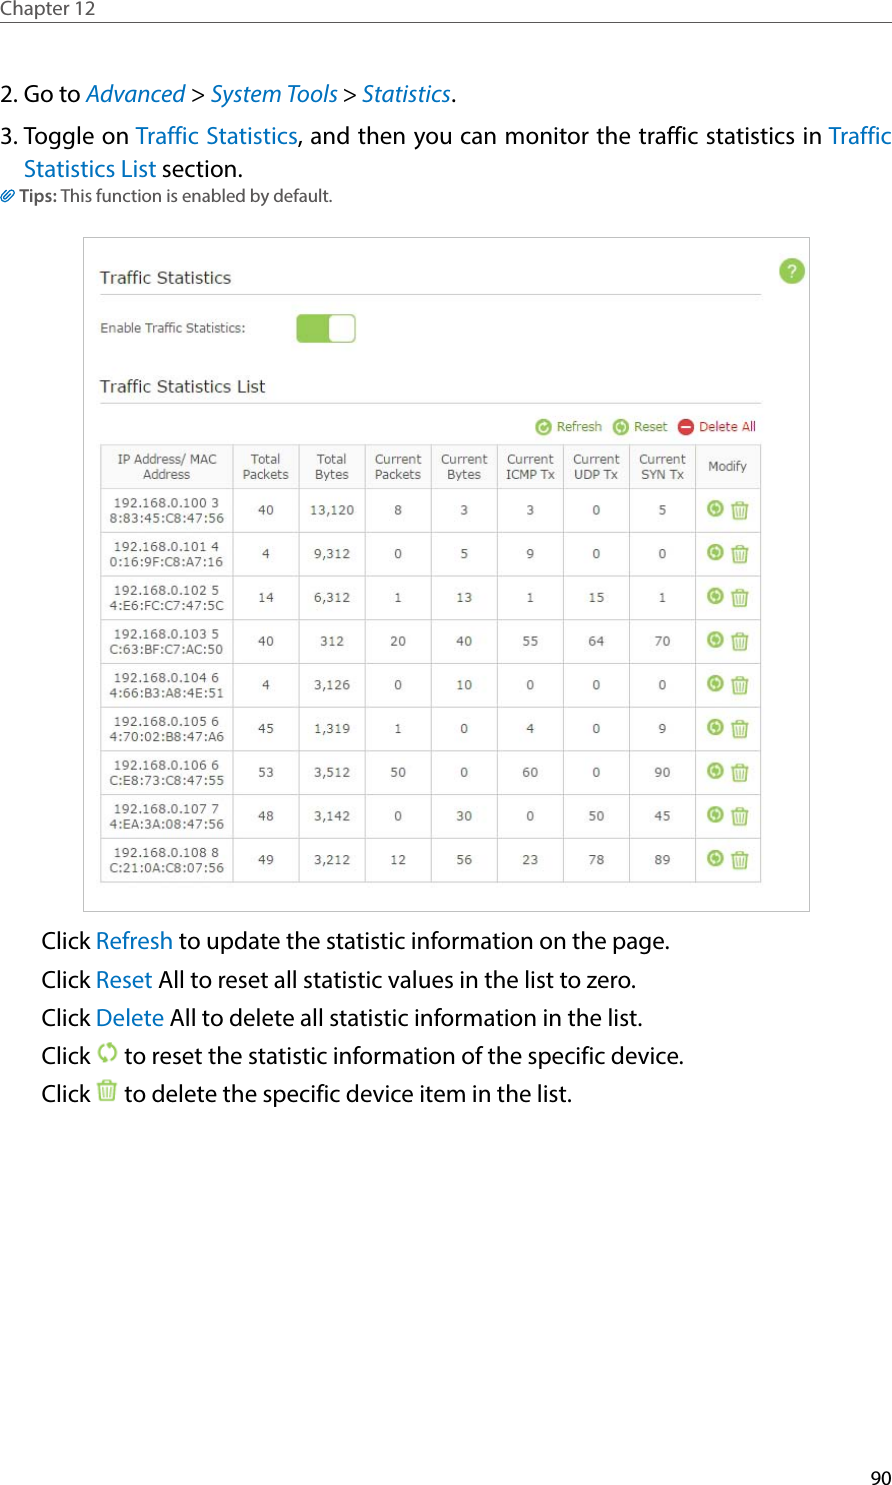 90Chapter 12  2. Go to Advanced &gt; System Tools &gt; Statistics.3. Toggle on Traffic Statistics, and then you can monitor the traffic statistics in Traffic Statistics List section.Tips: This function is enabled by default. Click Refresh to update the statistic information on the page.Click Reset All to reset all statistic values in the list to zero.Click Delete All to delete all statistic information in the list.Click   to reset the statistic information of the specific device.Click   to delete the specific device item in the list.